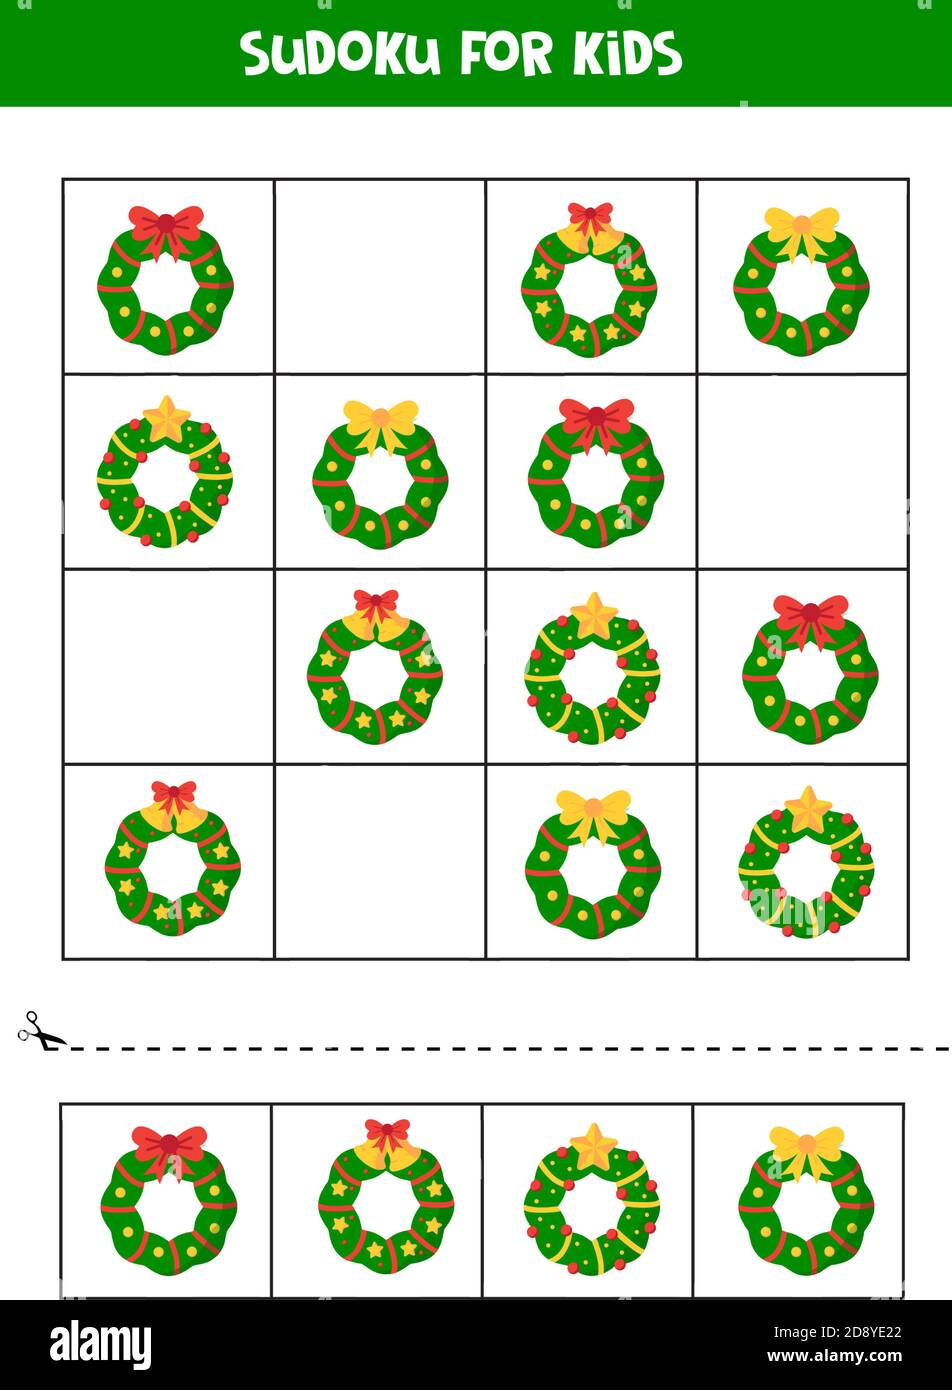 Sudoku game with different Christmas wreaths. Worksheet for children. Stock Vector